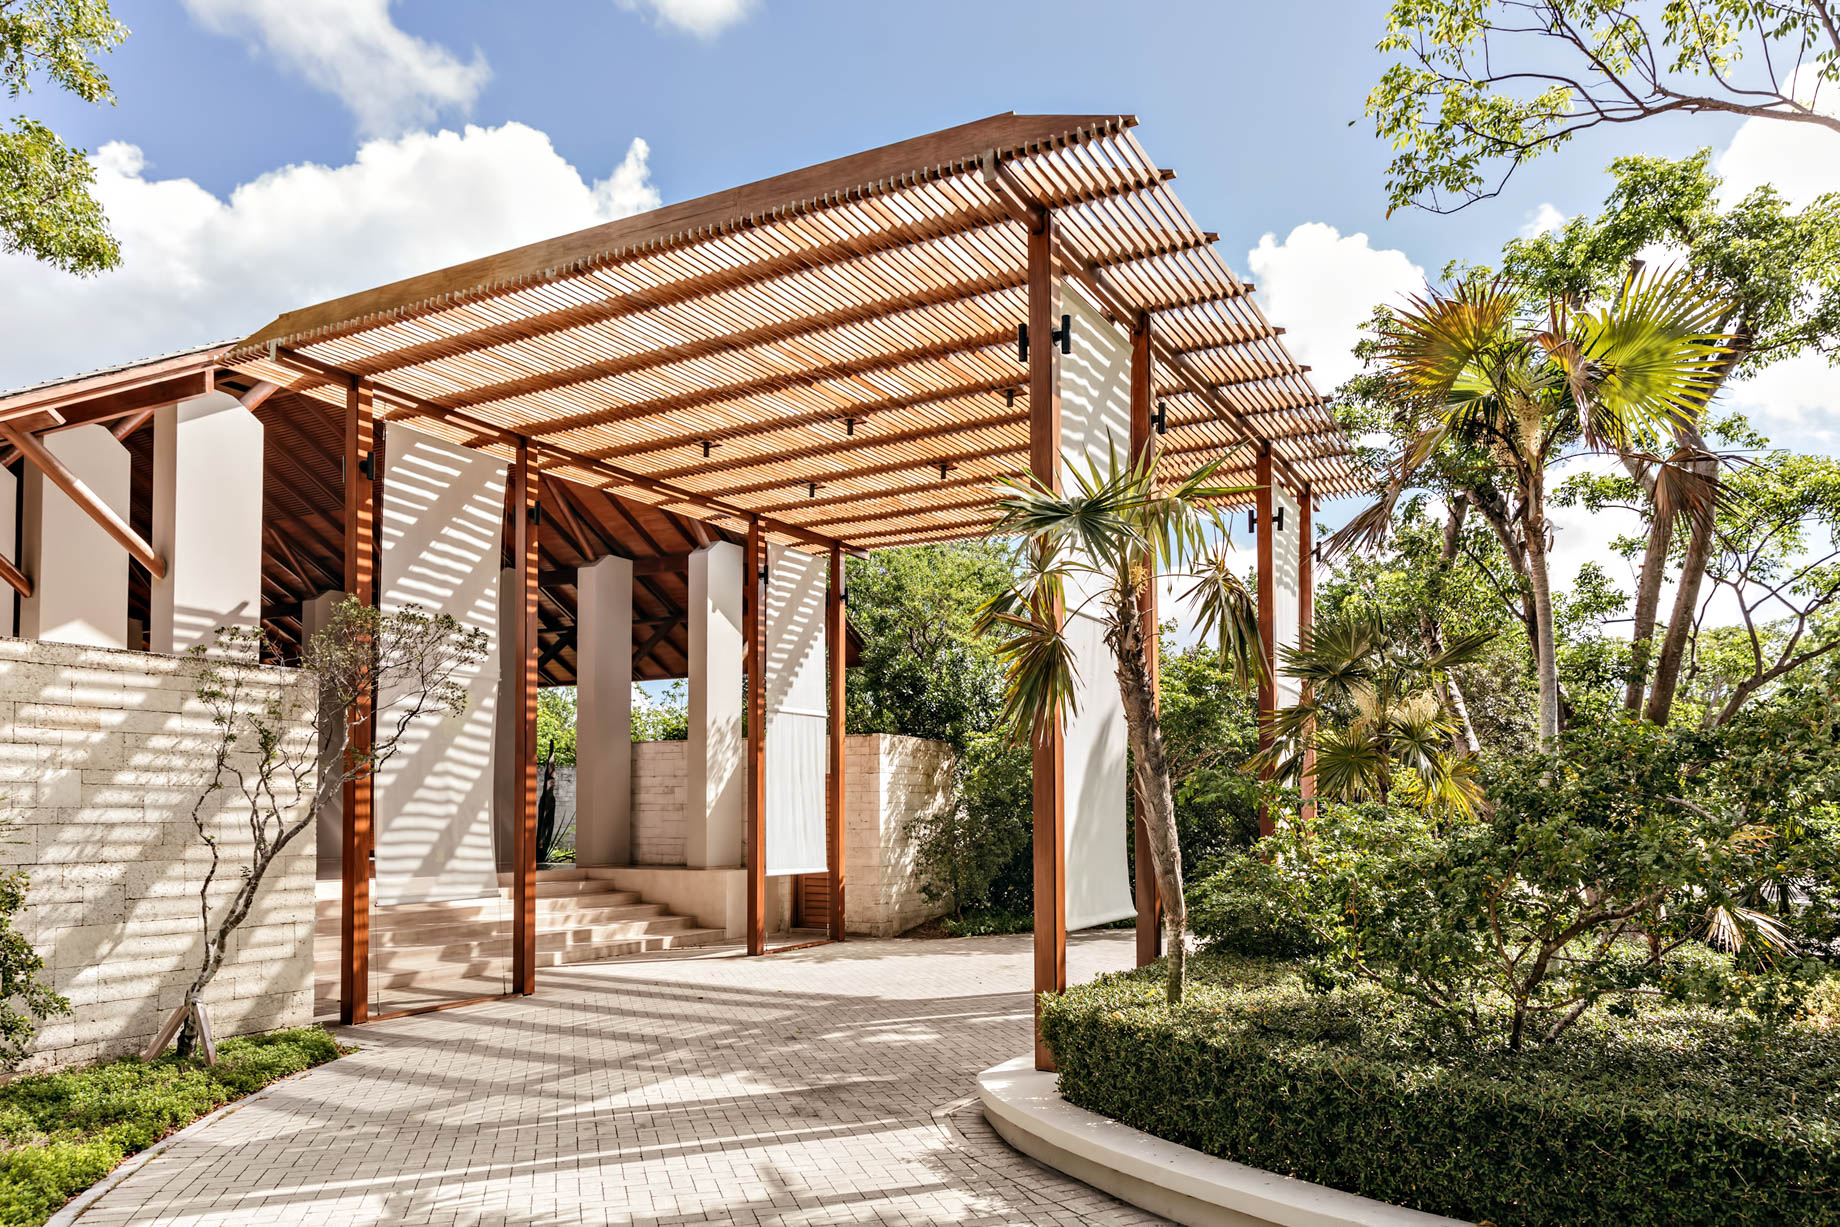 Amanyara Resort - Providenciales, Turks and Caicos Islands - Exclusive Wellness Architecture